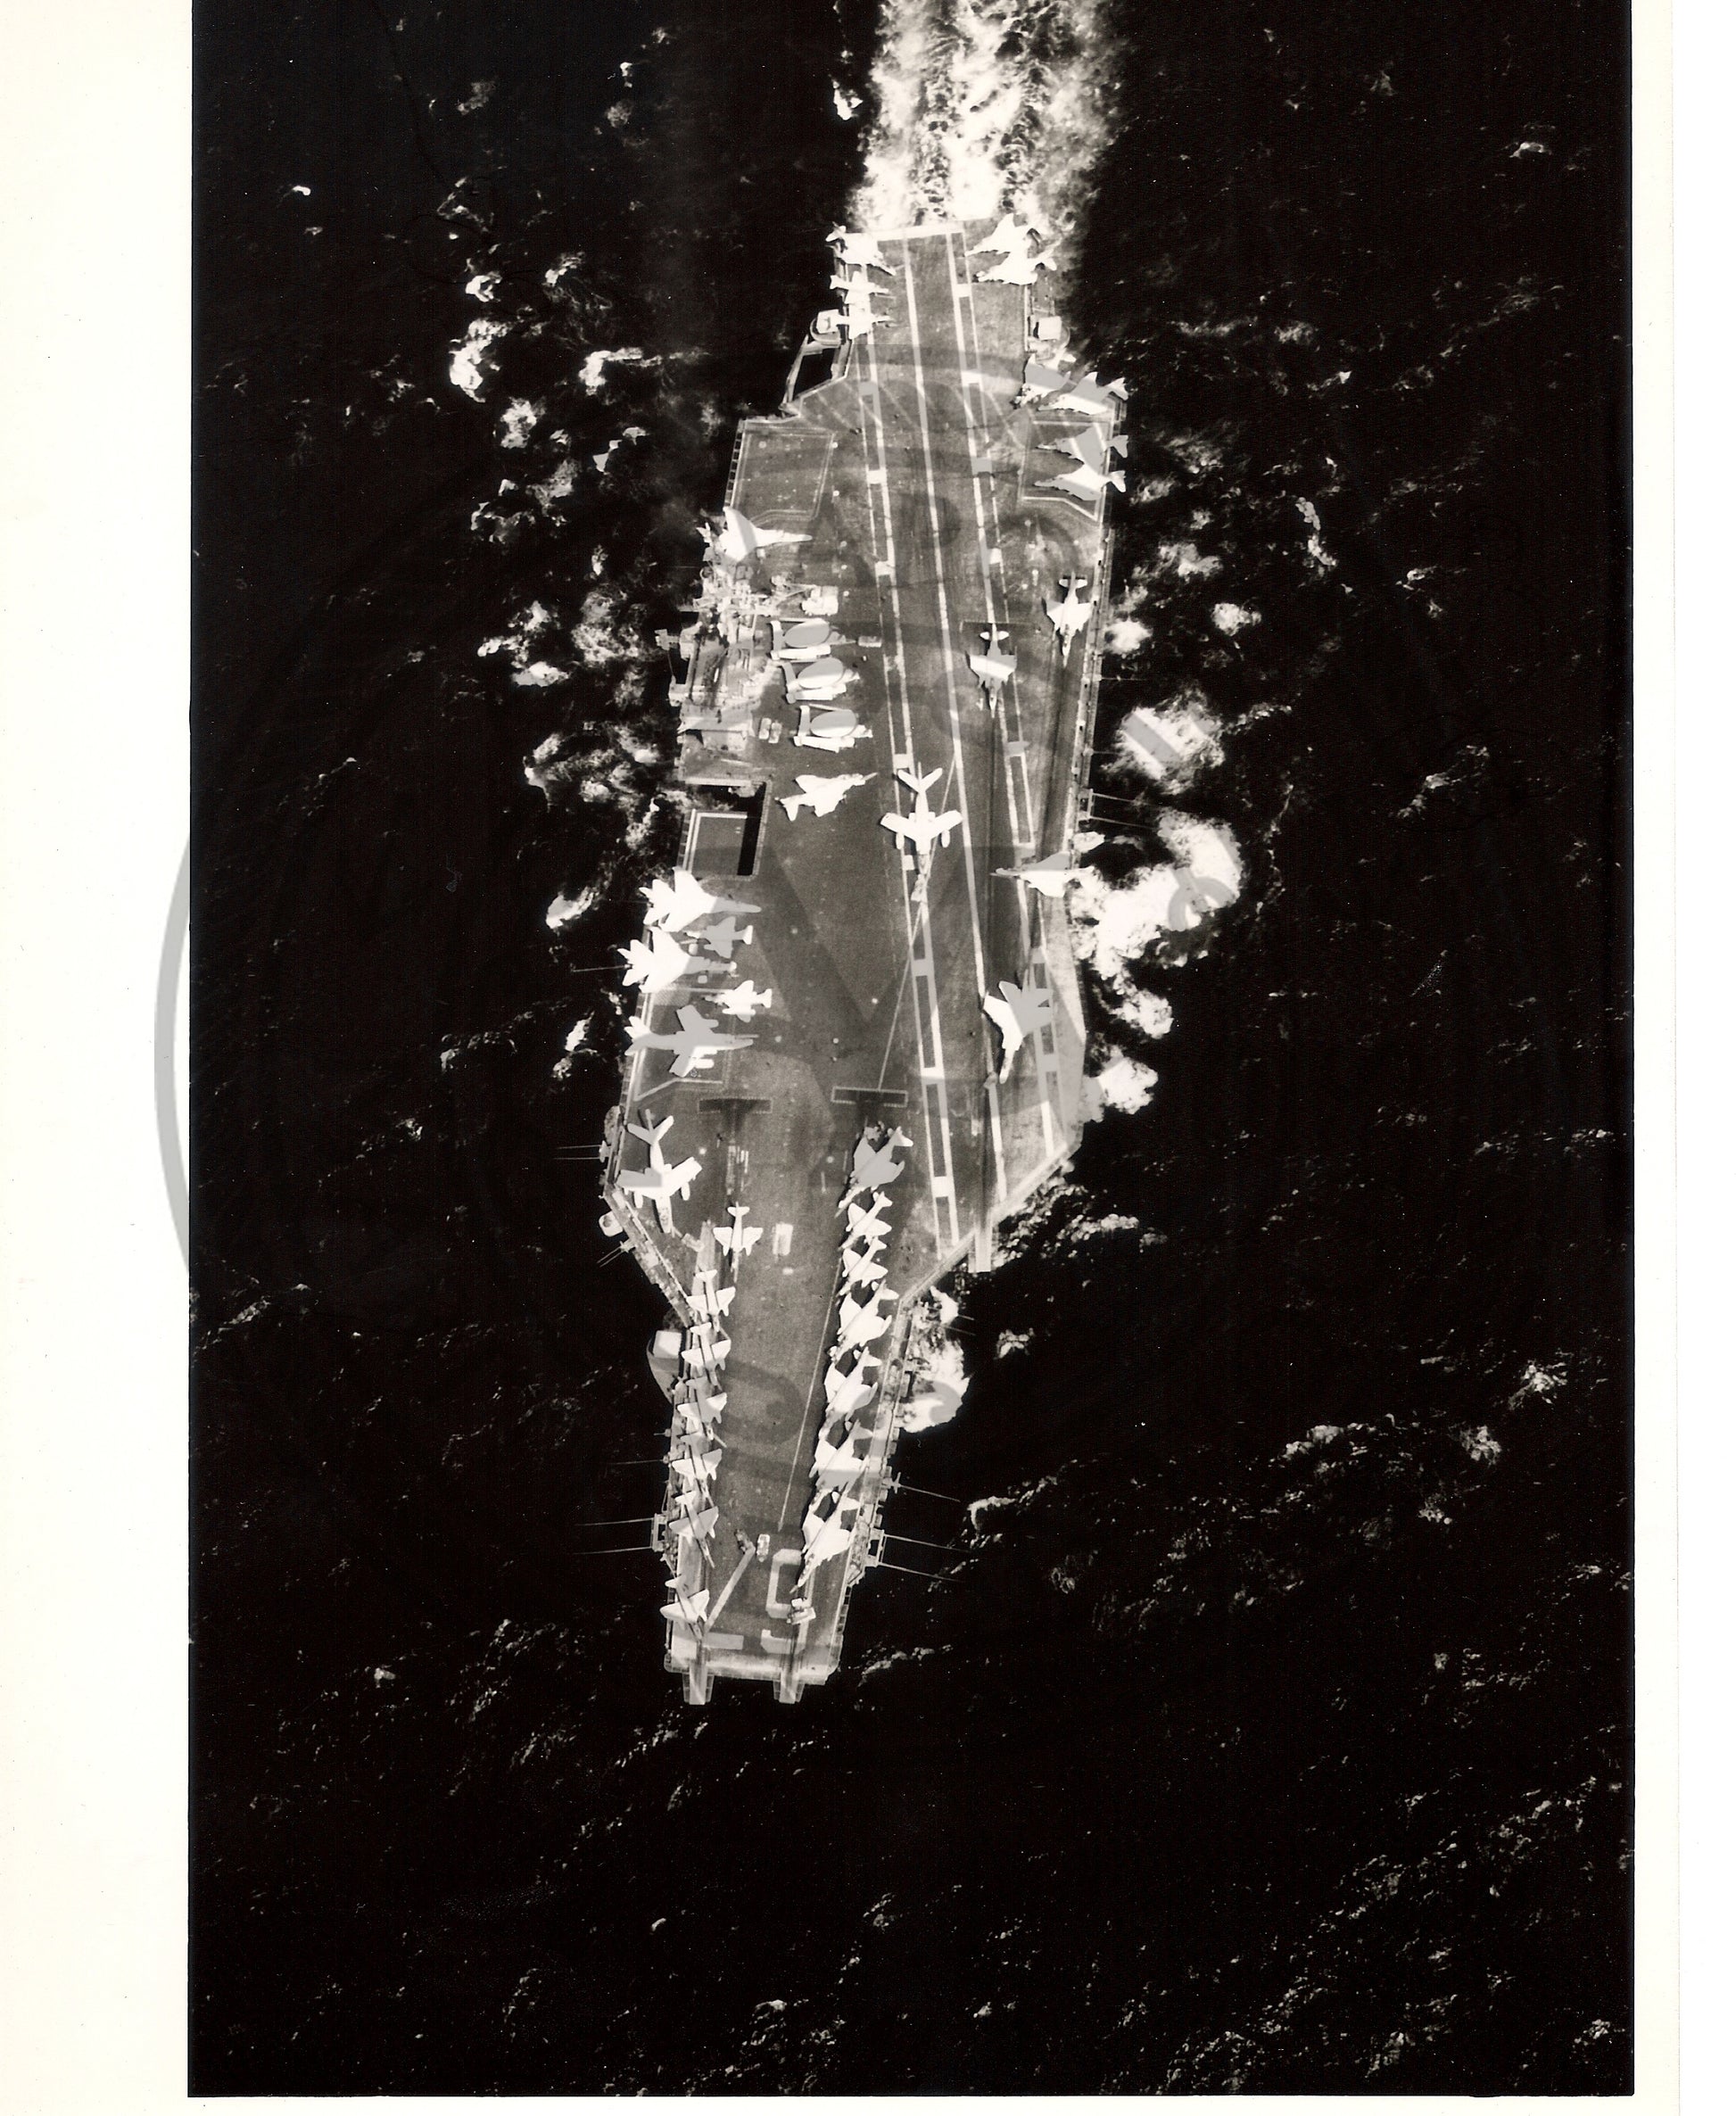 USS John F. Kennedy (CVA-67) 9 prints, identify which print you want after placing in cart. - Annapolis Maritime Antiques